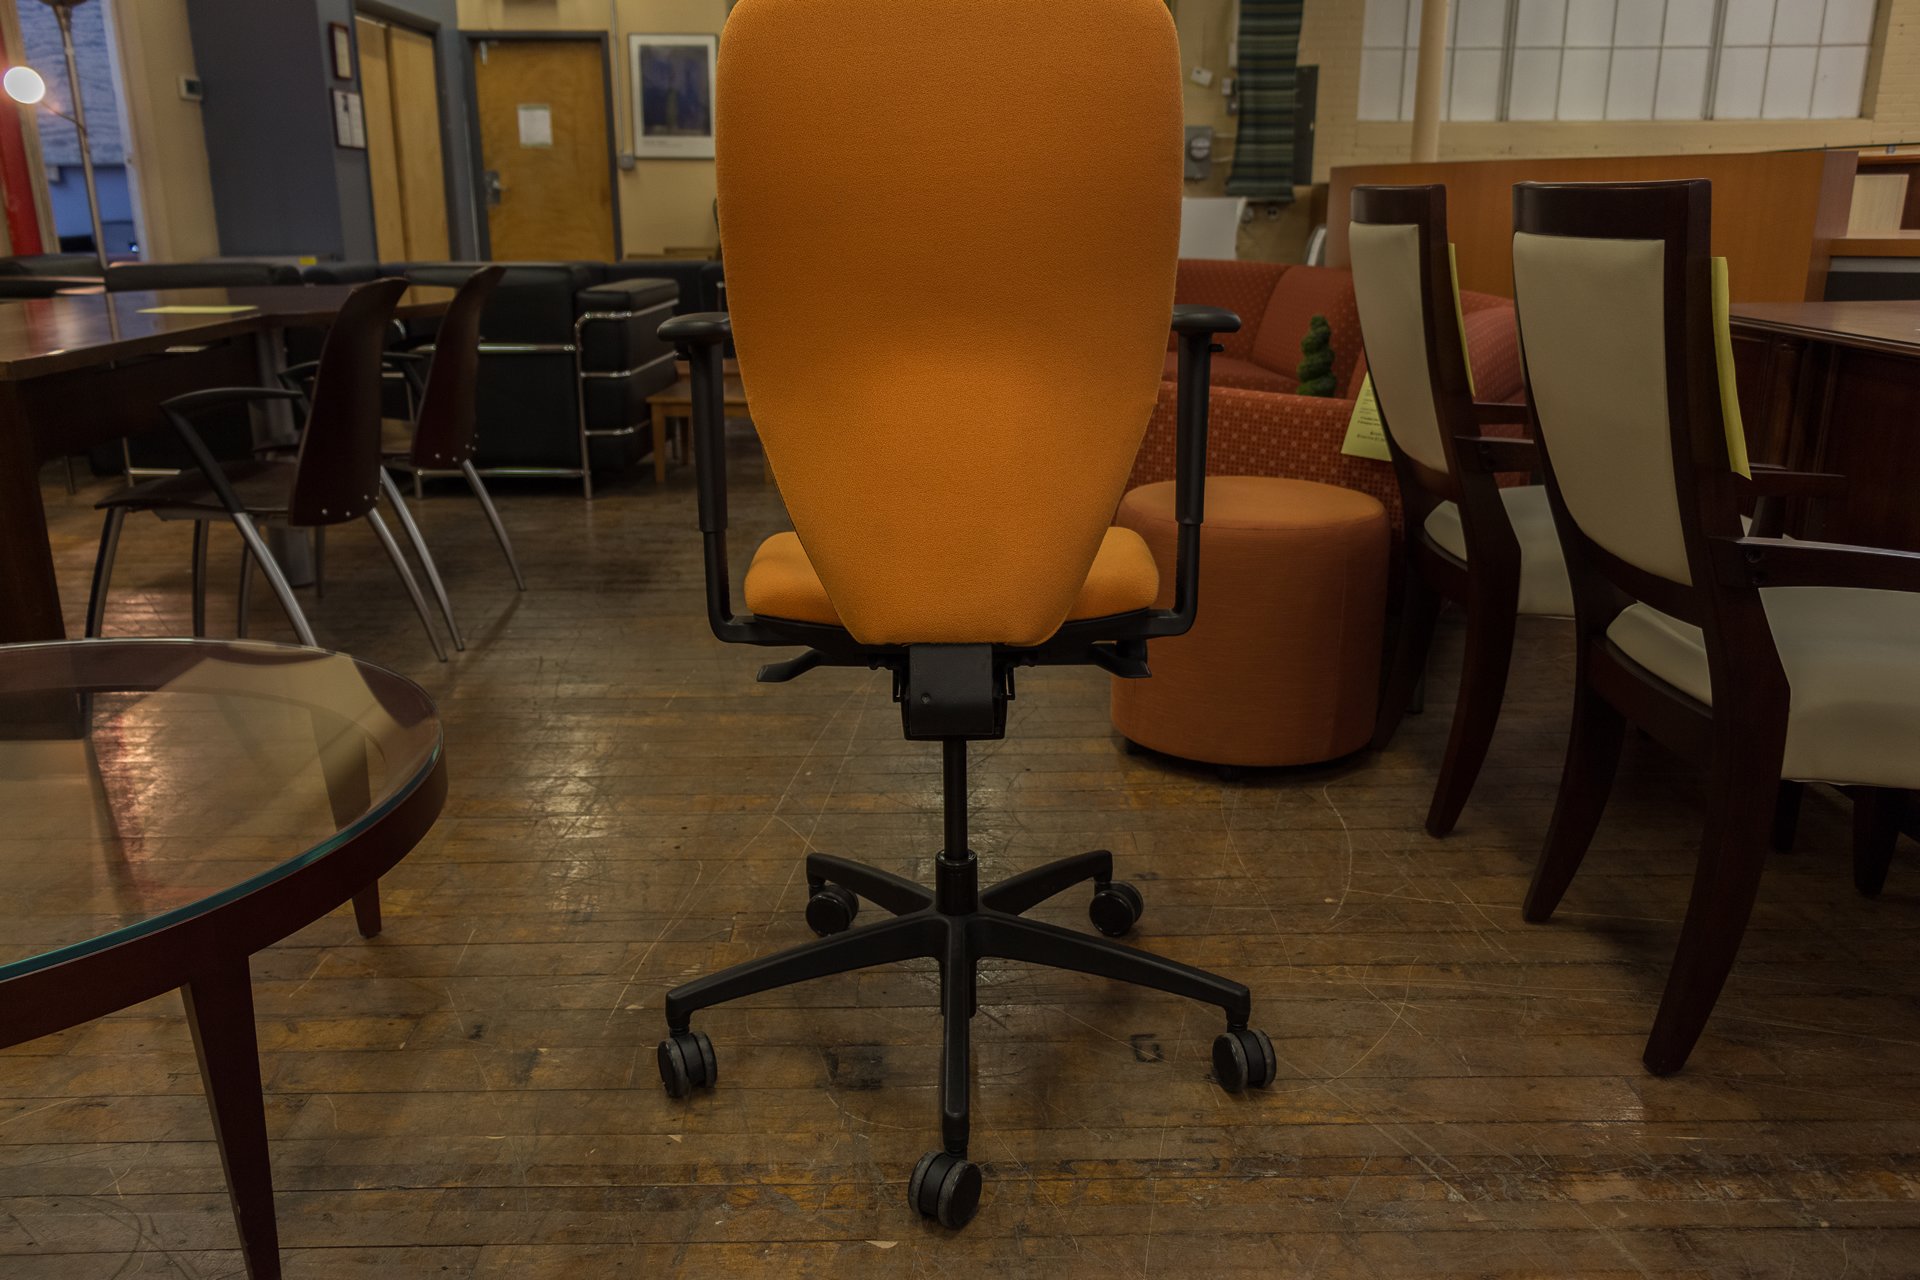 peartreeofficefurniture_peartreeofficefurniture_peartreeofficefurniture_boss-design-multi-function-task-chairs-in-red-blue-and-orange-10.jpg